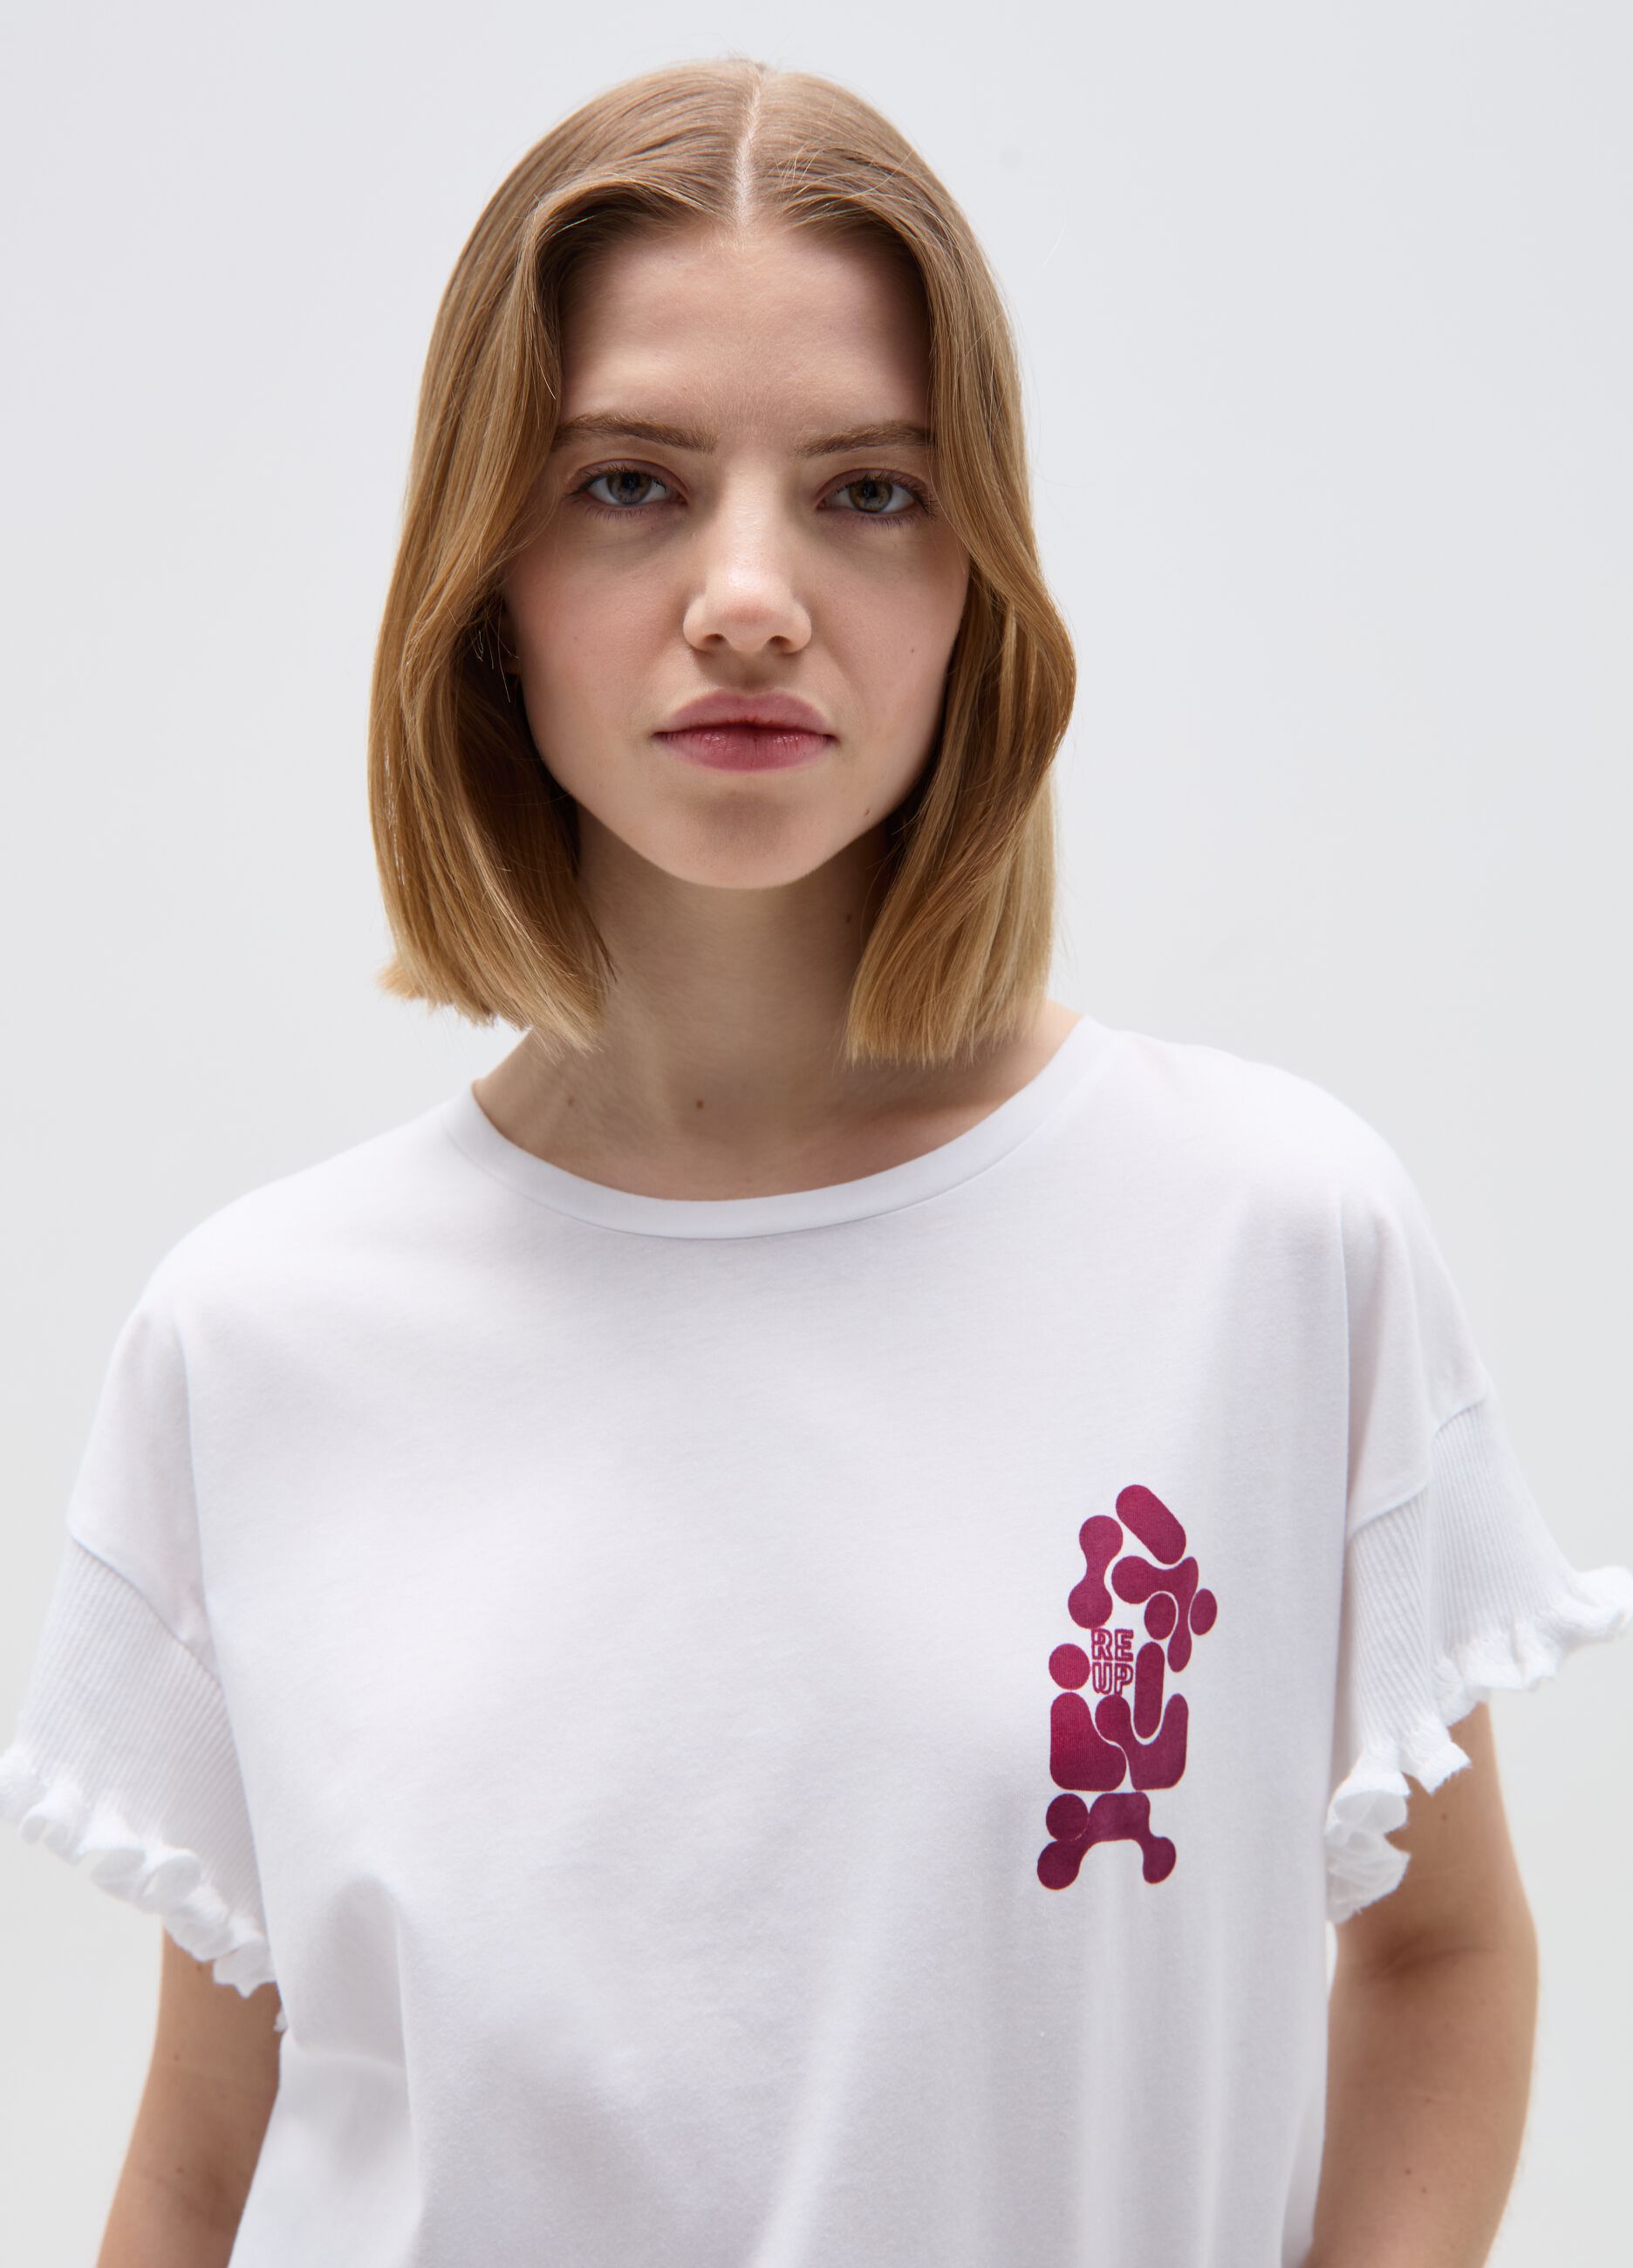 RE-UP T-shirt with frills